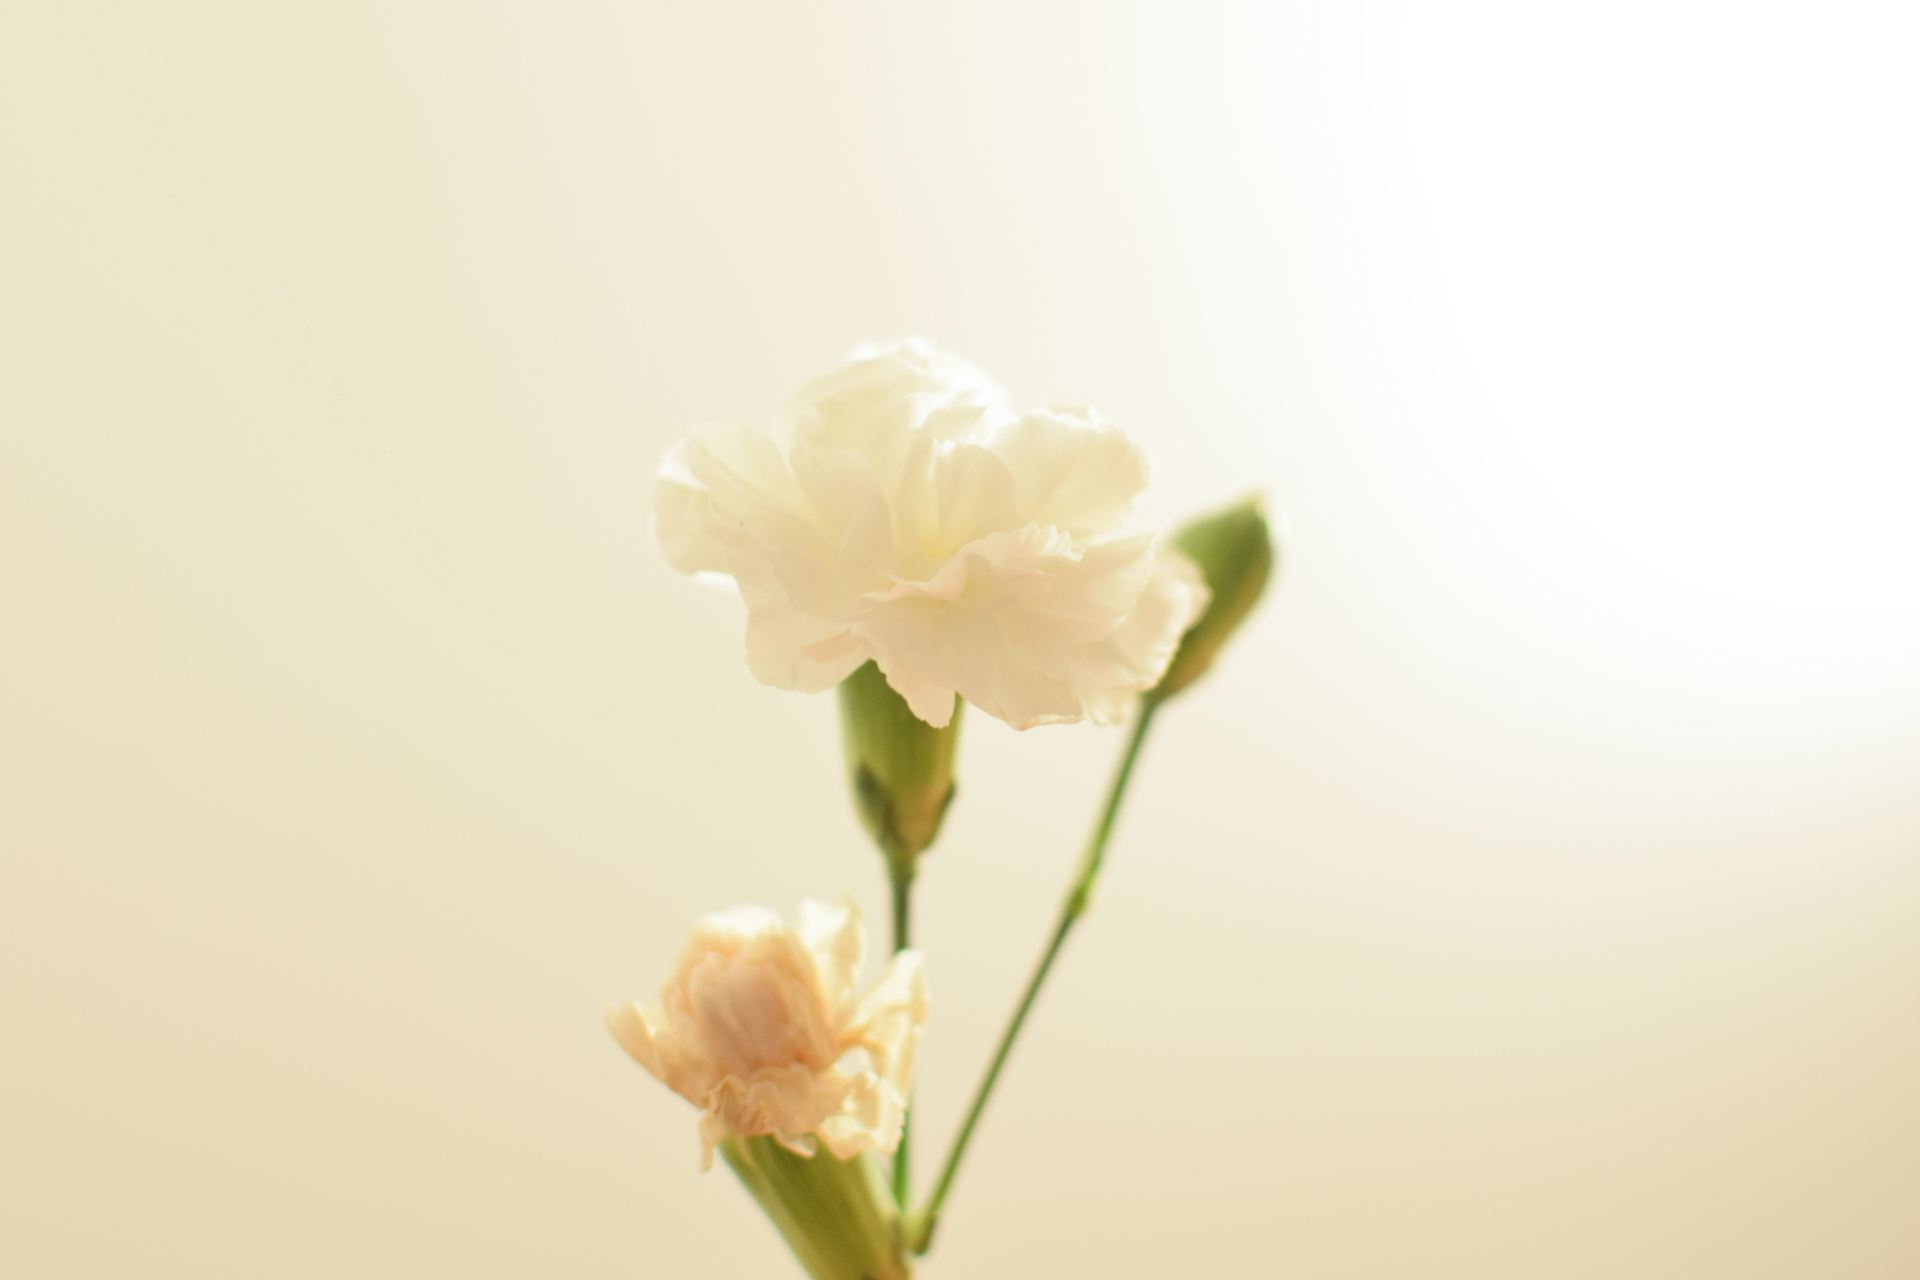 white petaled flower bloom close-up photography